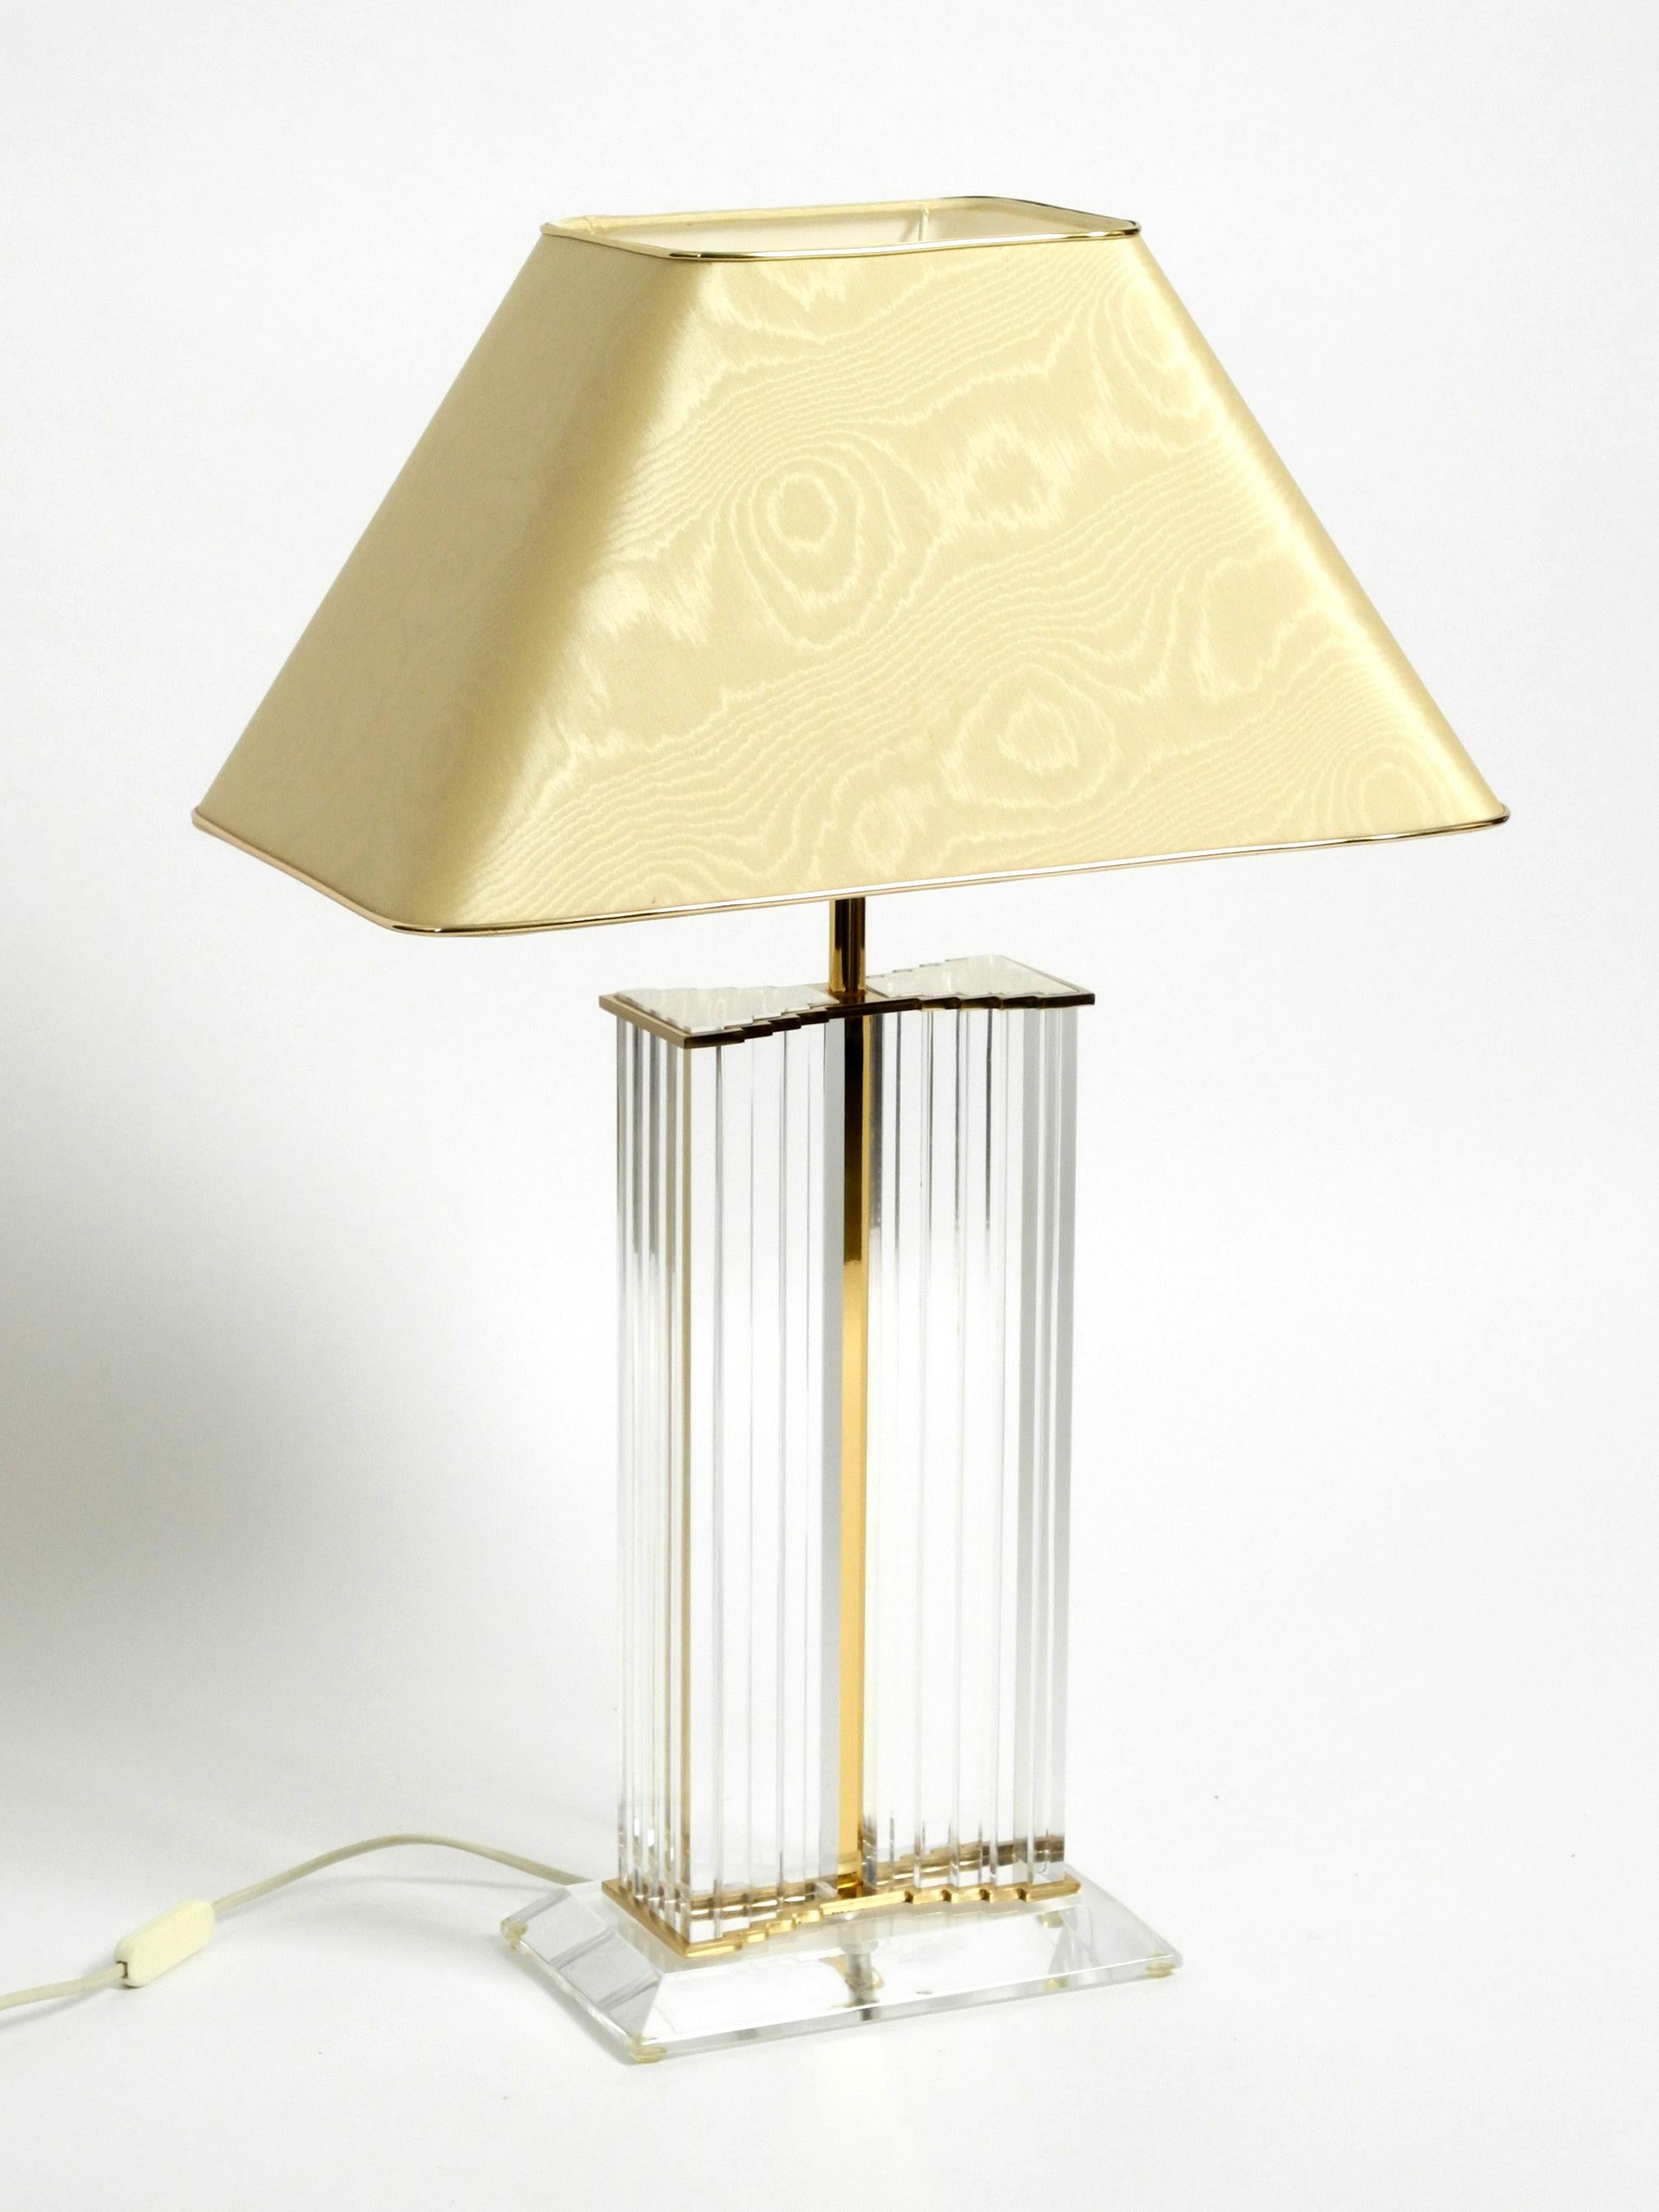 Very Rare Elegant Large Plexiglass Table Lamp from the 1970s with Silk Shade For Sale 6